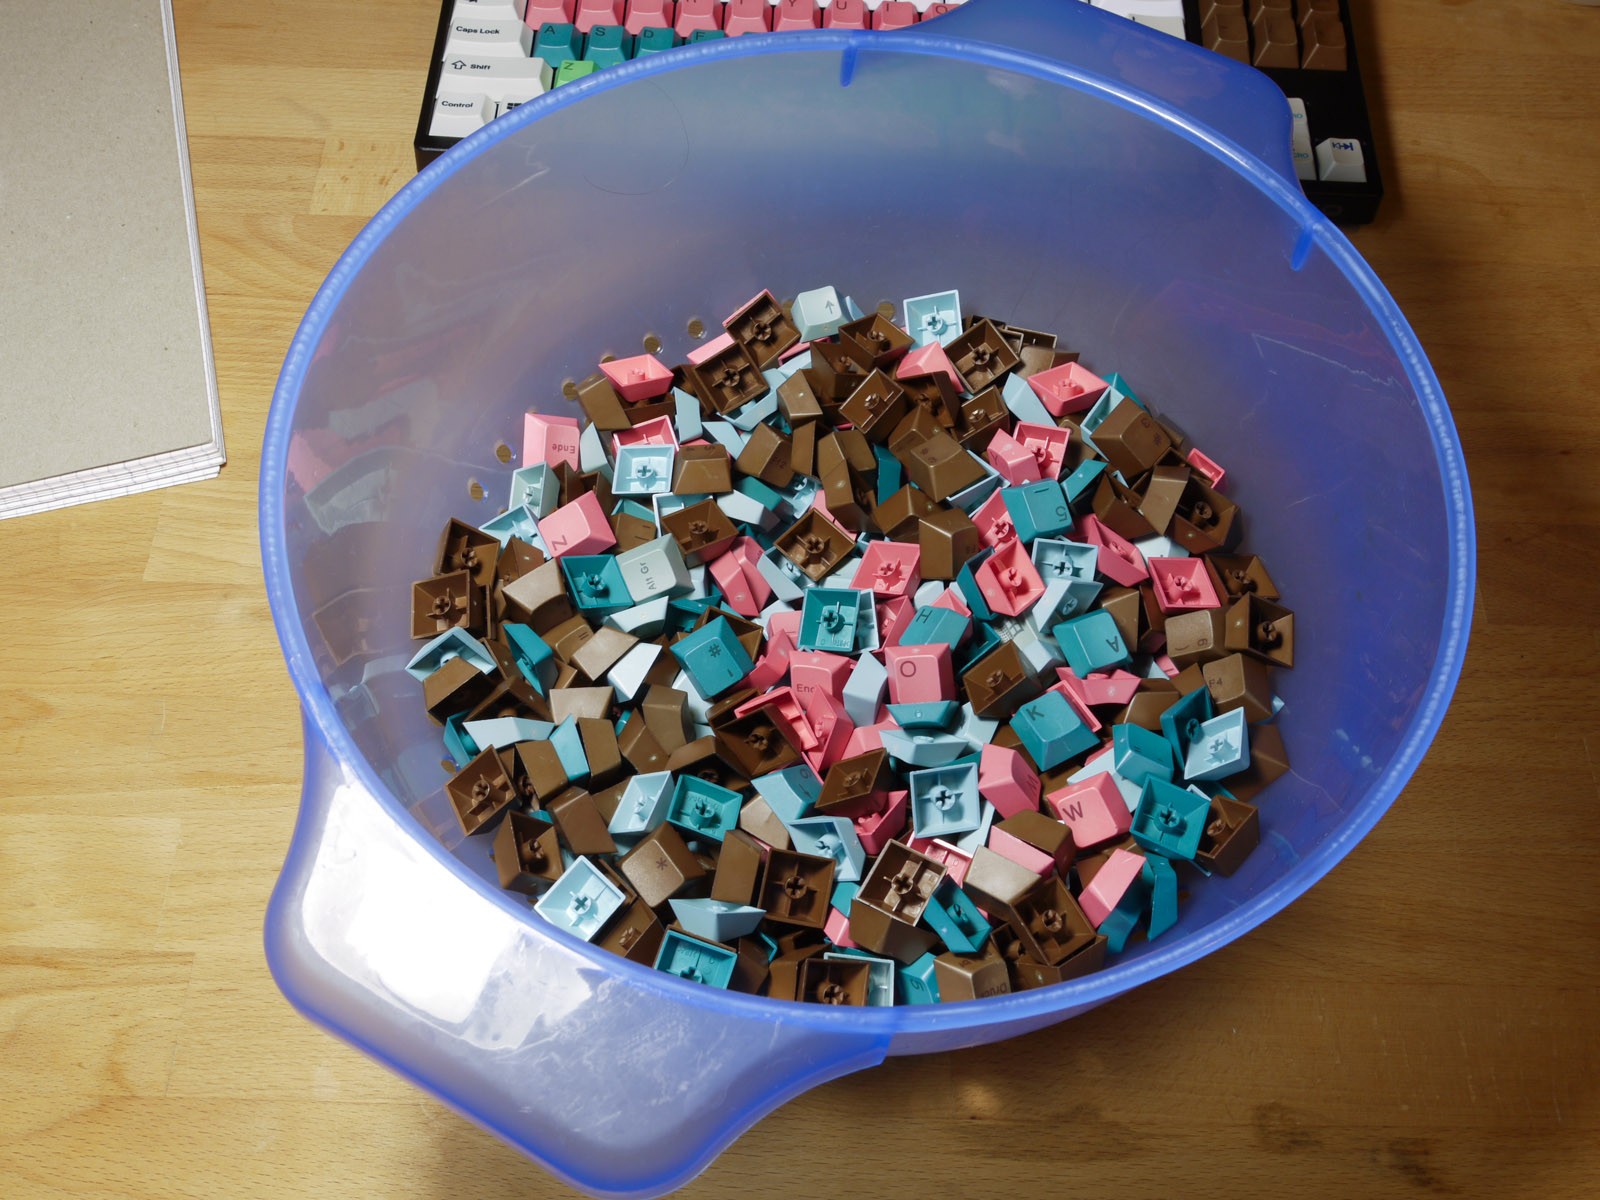 A bunch of colourful caps.